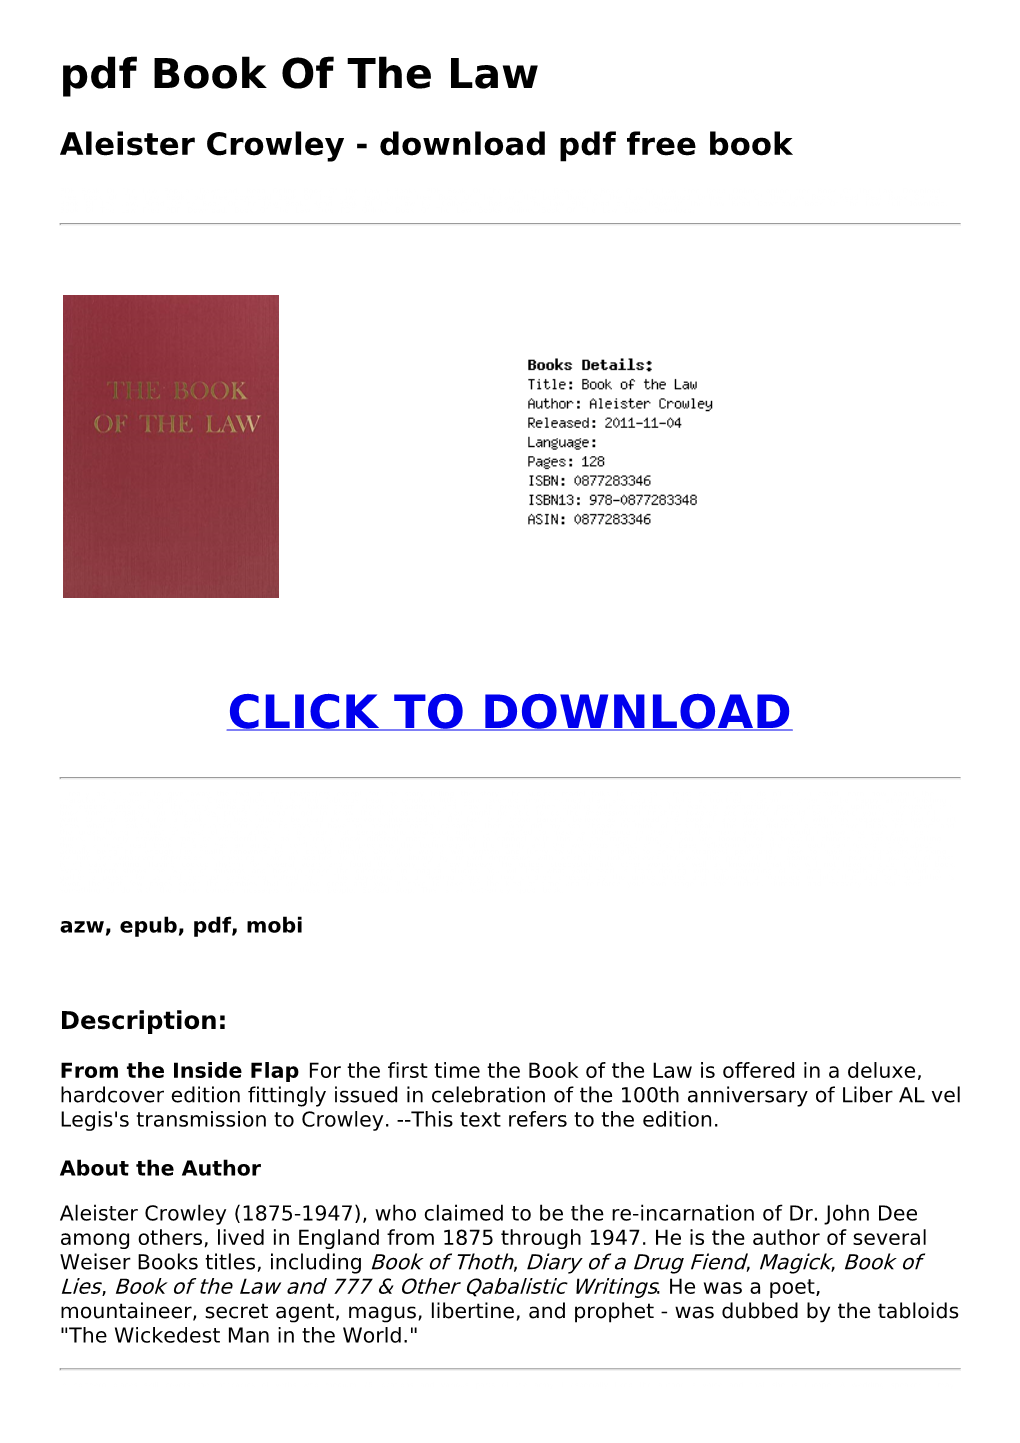 Pdf Book of the Law Aleister Crowley